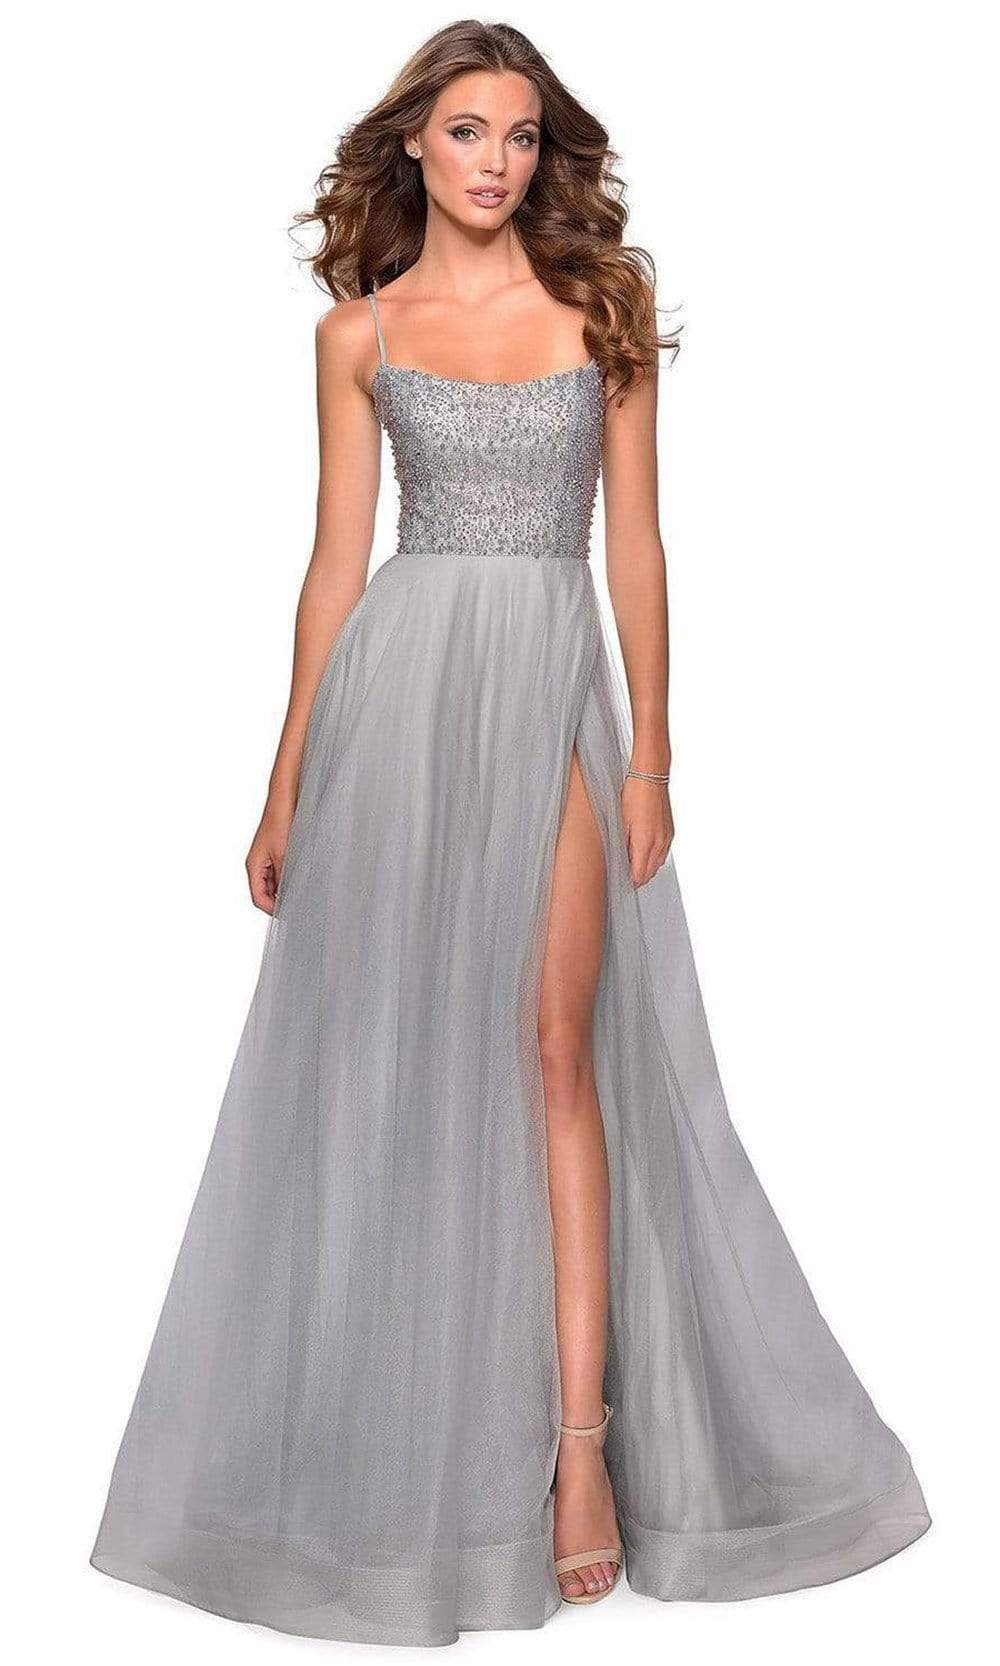 La Femme - Long Beaded Bodice High Slit Tulle Dress 28530SC - 1 pc Mauve In Size 2 and 1 pc Silver in Size 0 Available CCSALE 0 / Silver